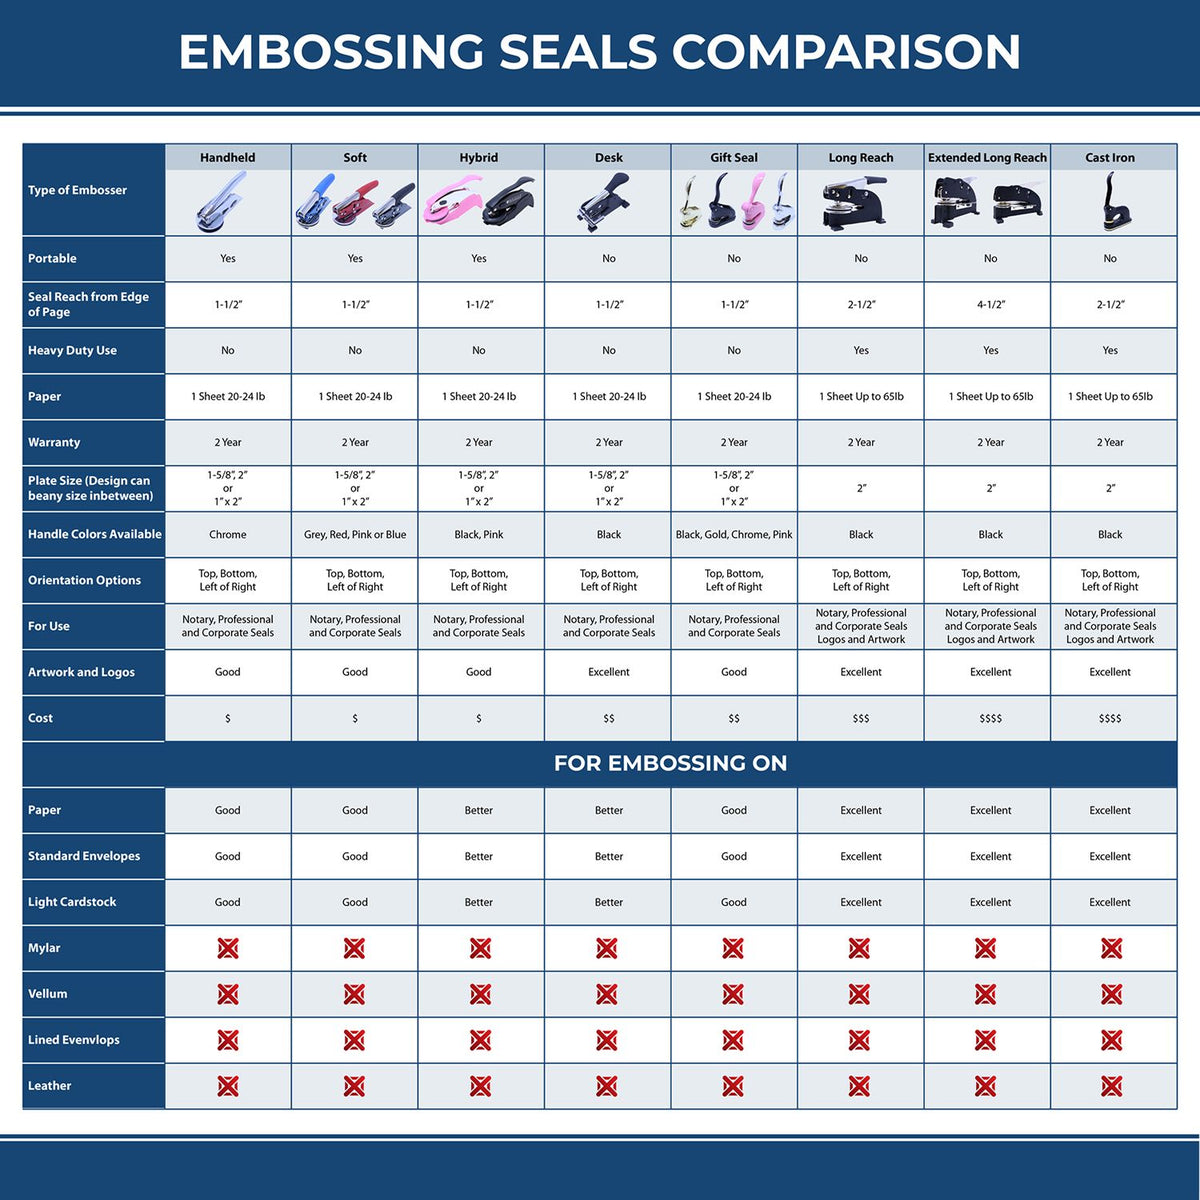 A comparison chart for the different types of mount models available for the Gift Maine Geologist Seal